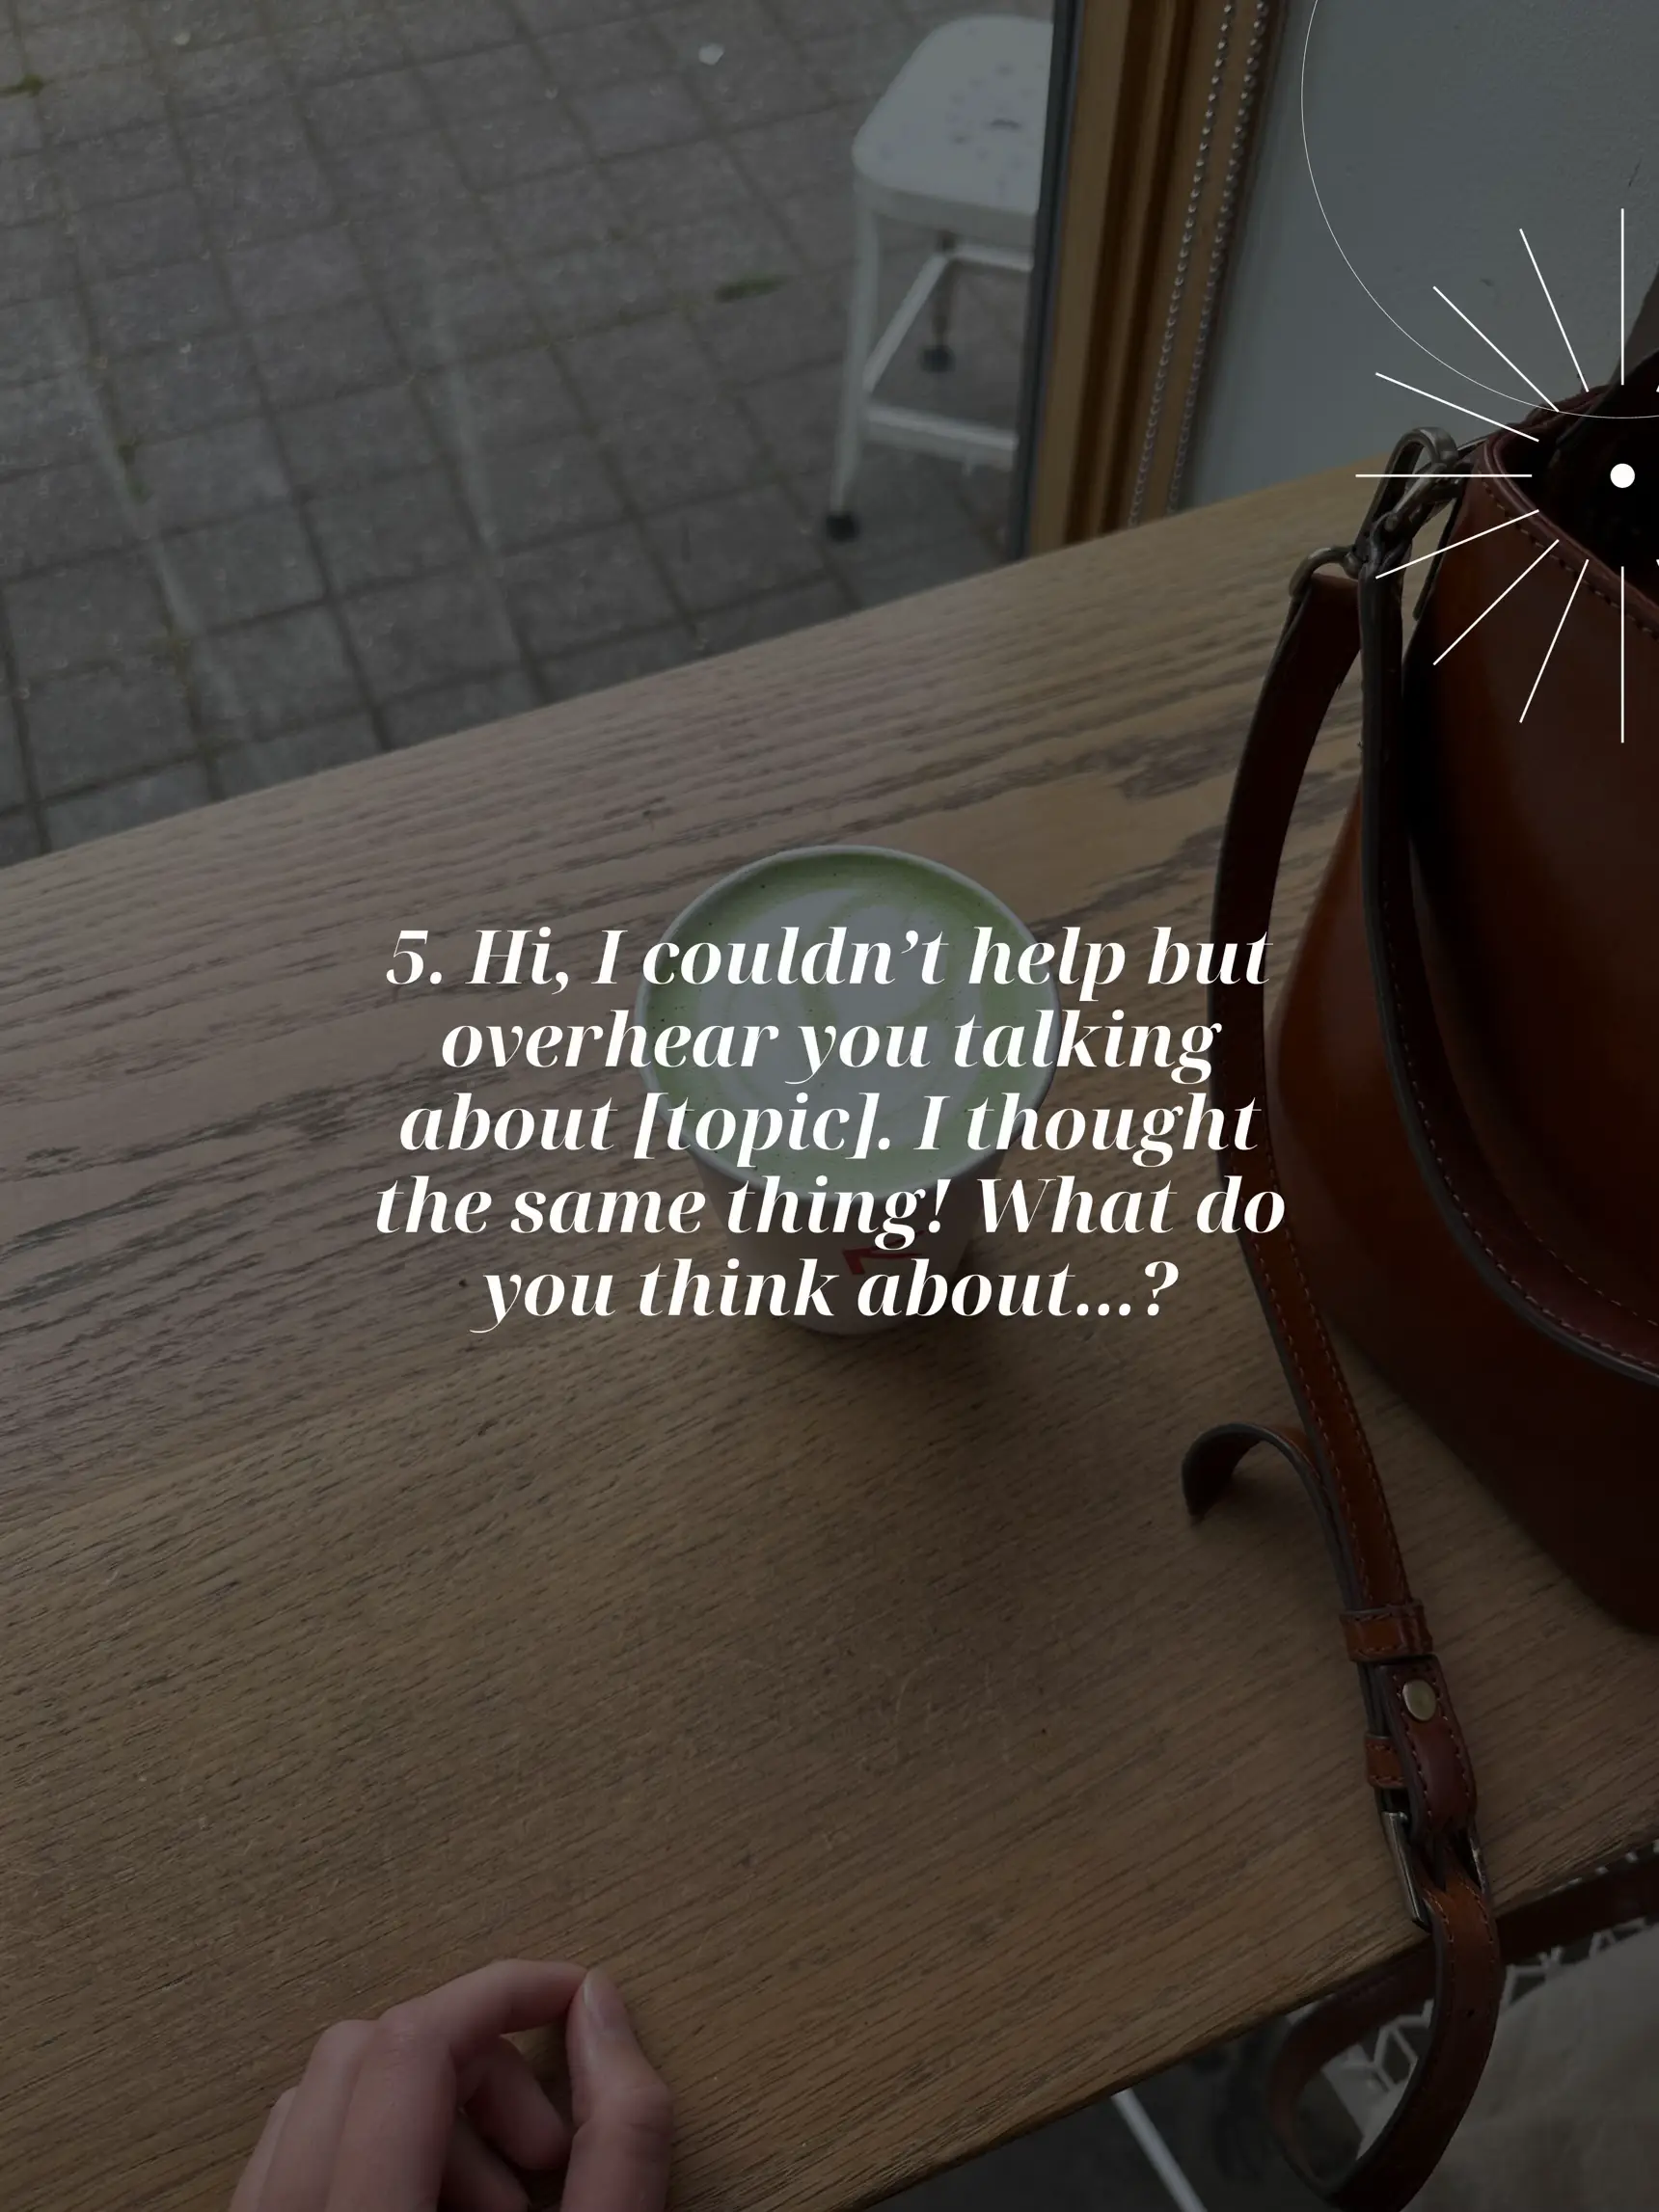  A person is sitting at a table with a handbag on it.